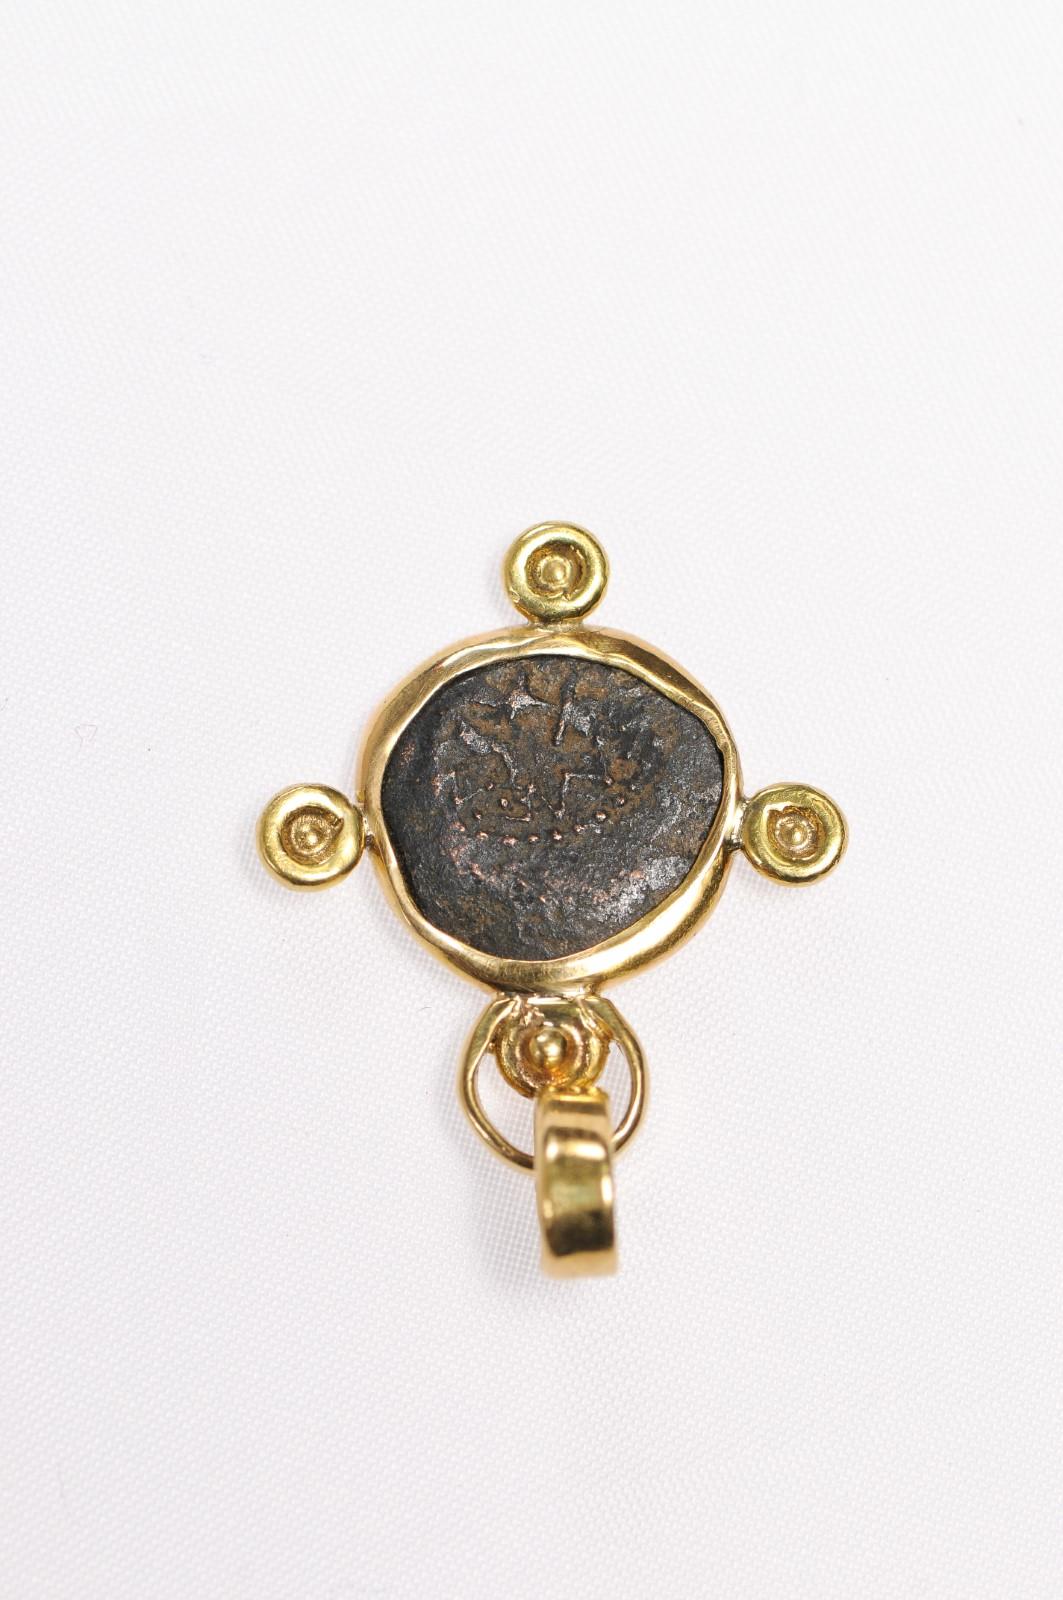 Roman Widow's Mite Coin, 22kt Gold Pendant (pendant only) For Sale 6